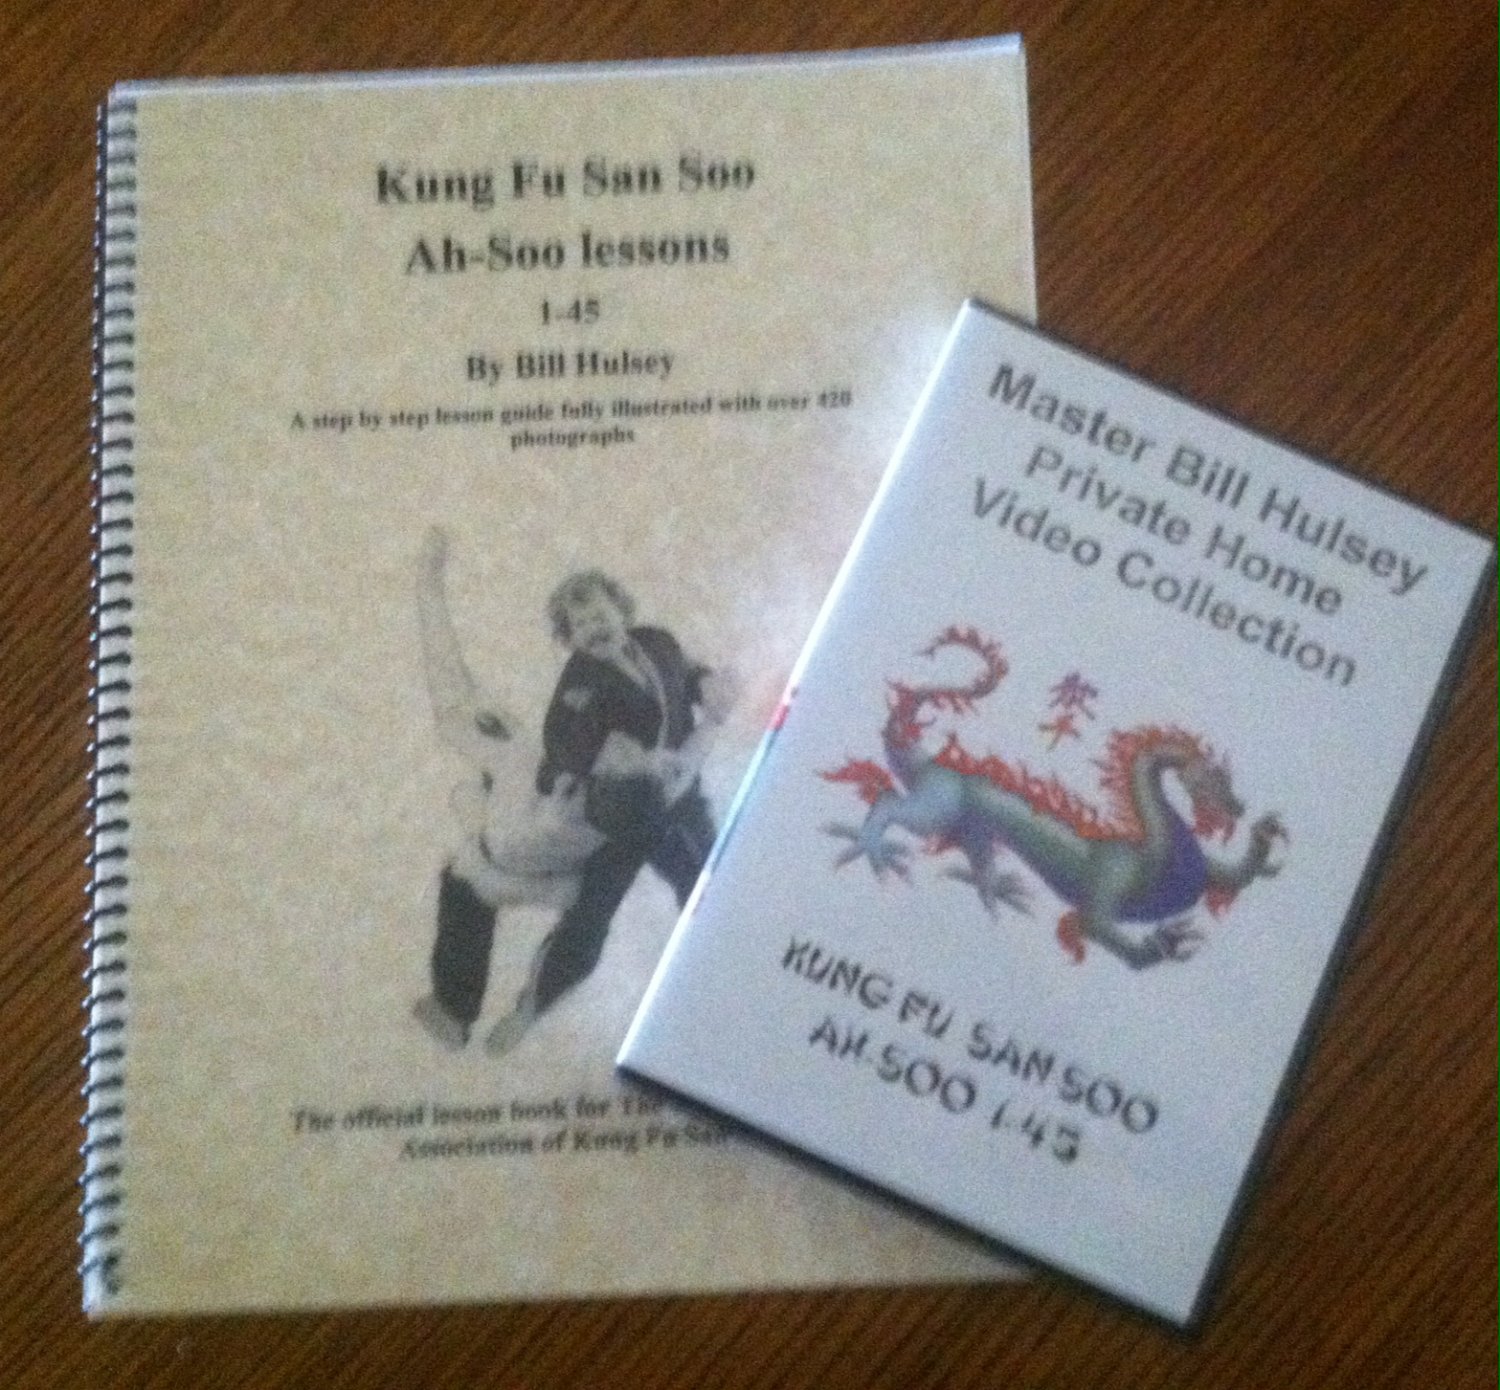 Ah-Soo DVD and Lesson Book